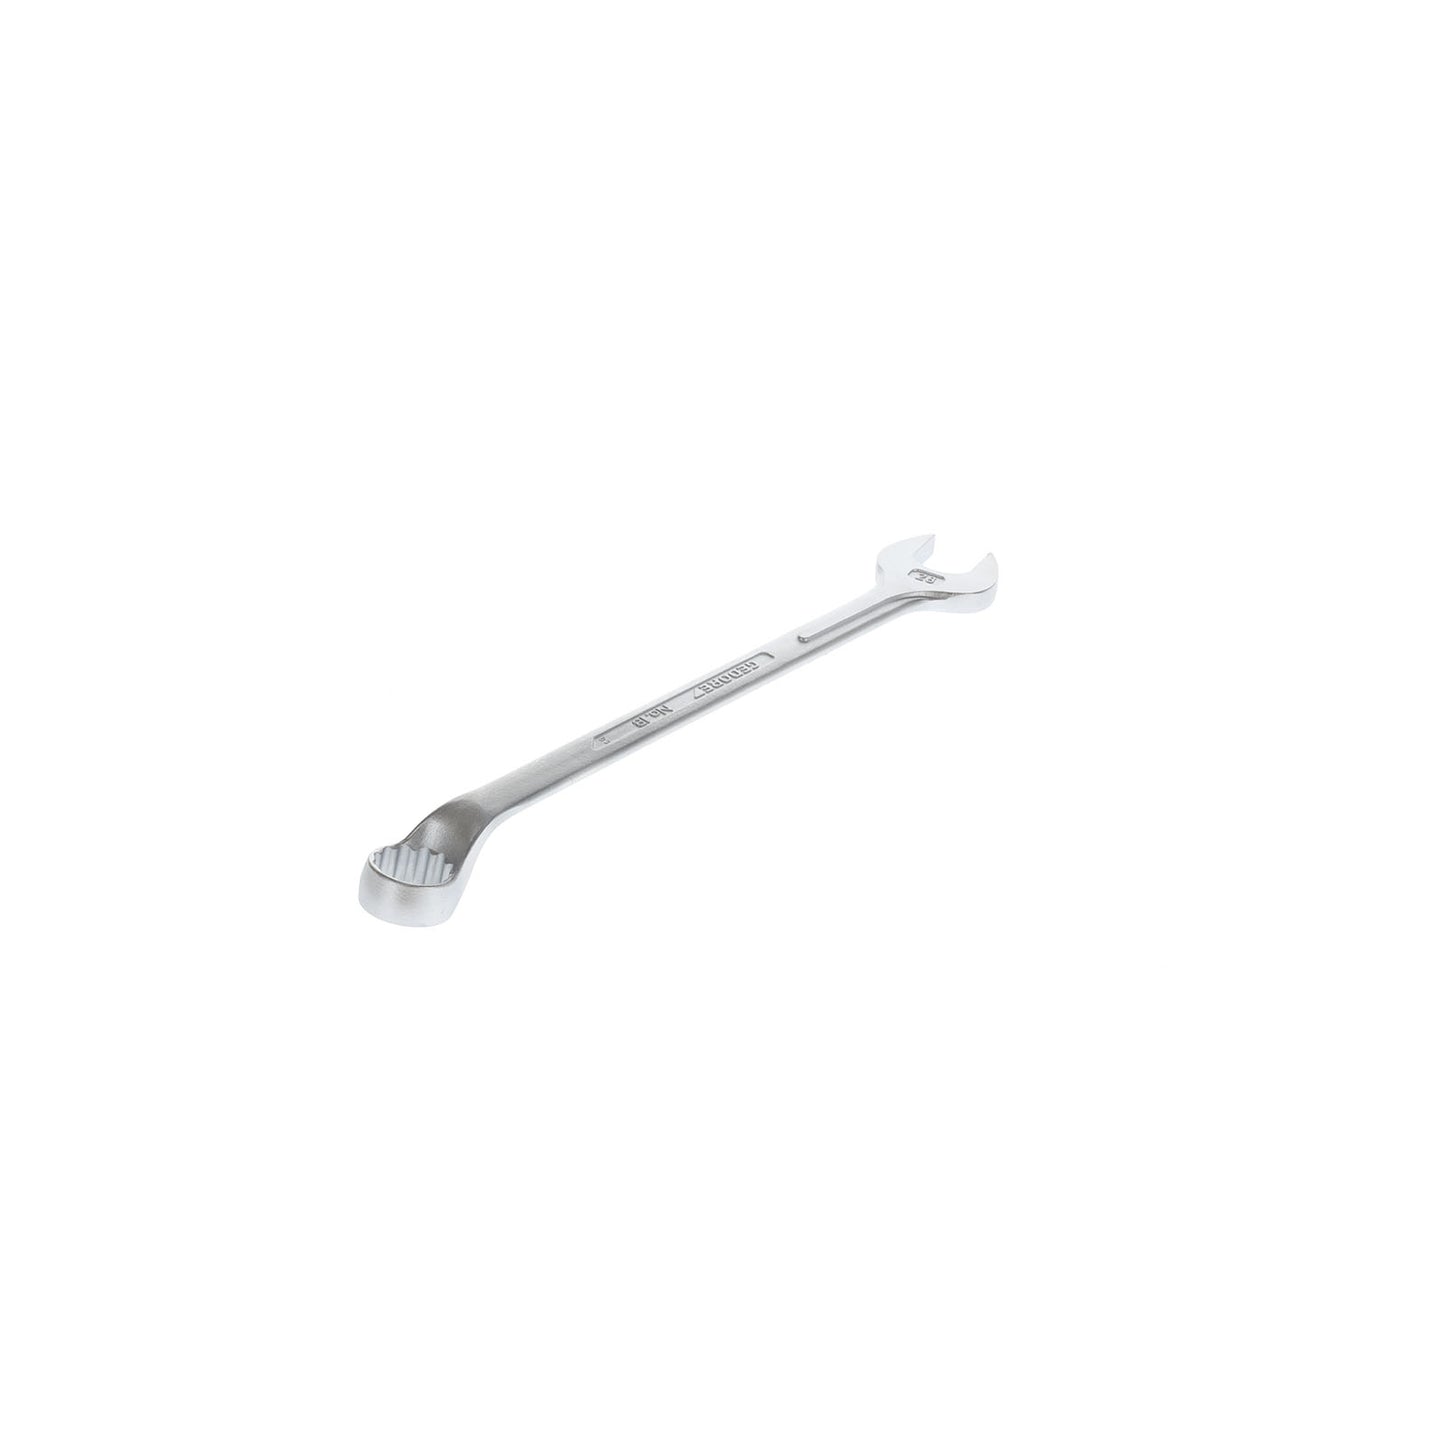 GEDORE 1 B 28 - Offset Combination Wrench, 28mm (6002880)